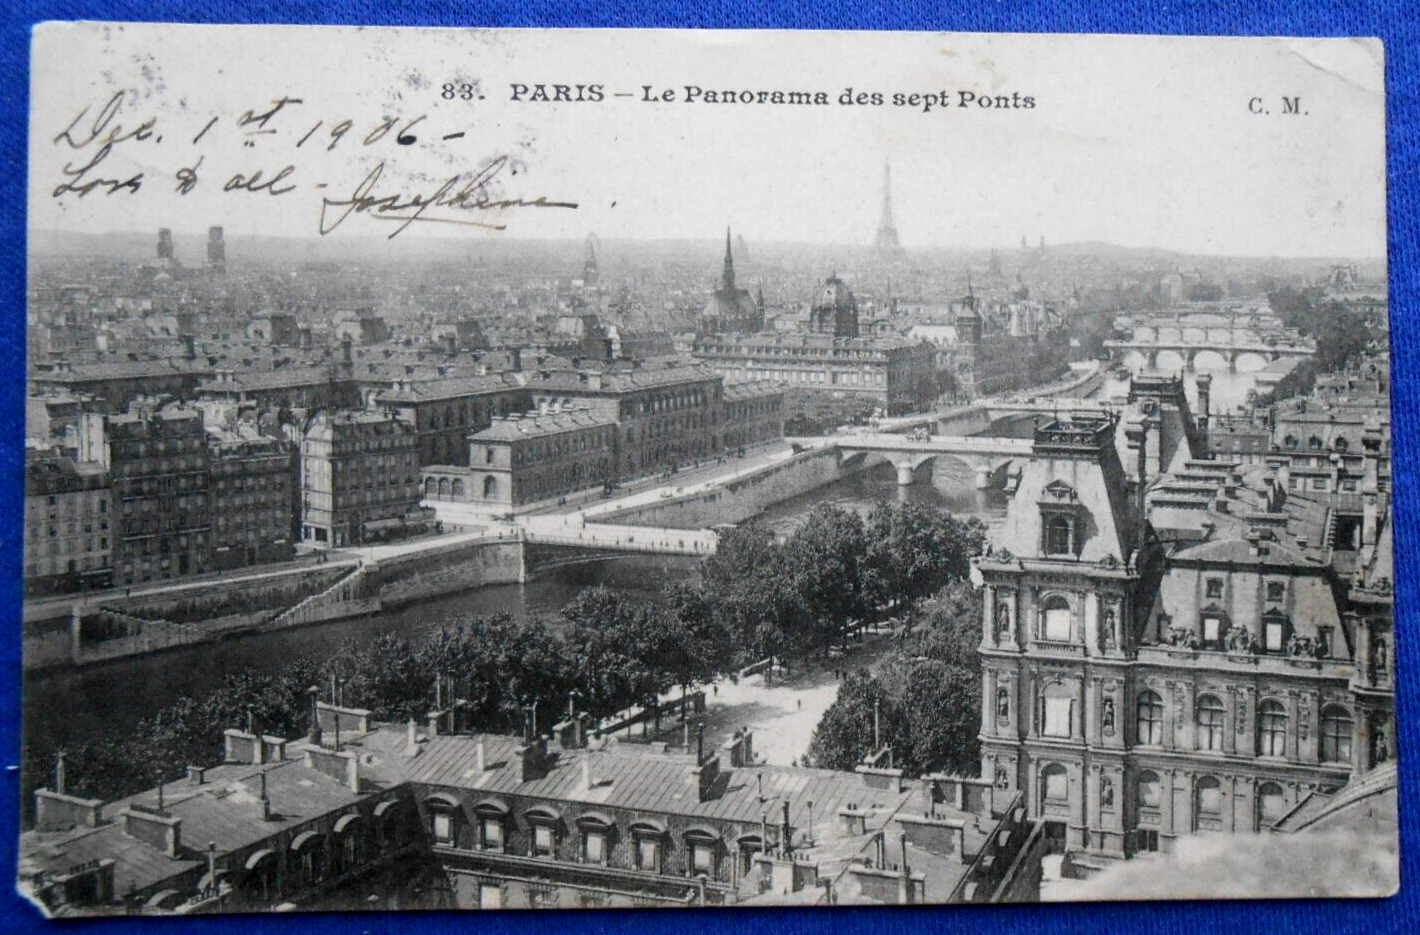 ANTIQUE 1906 PARIS FRANCE POSTCARD PANORAMA BIRDS EYE VIEW POSTED TO VERMONT